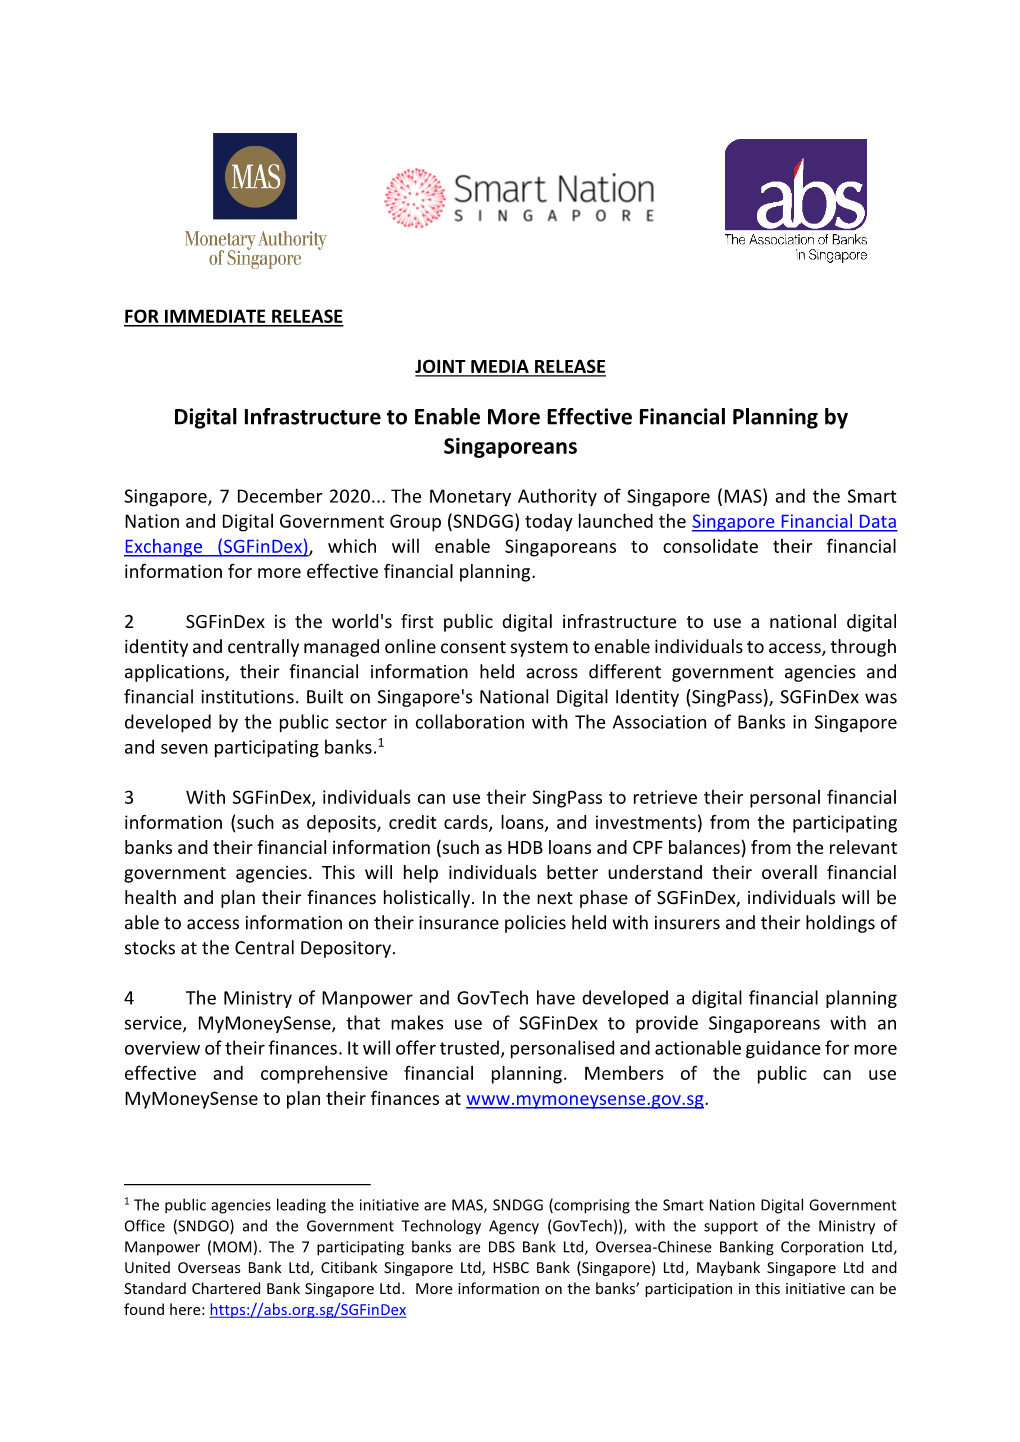 Digital Infrastructure to Enable More Effective Financial Planning by Singaporeans